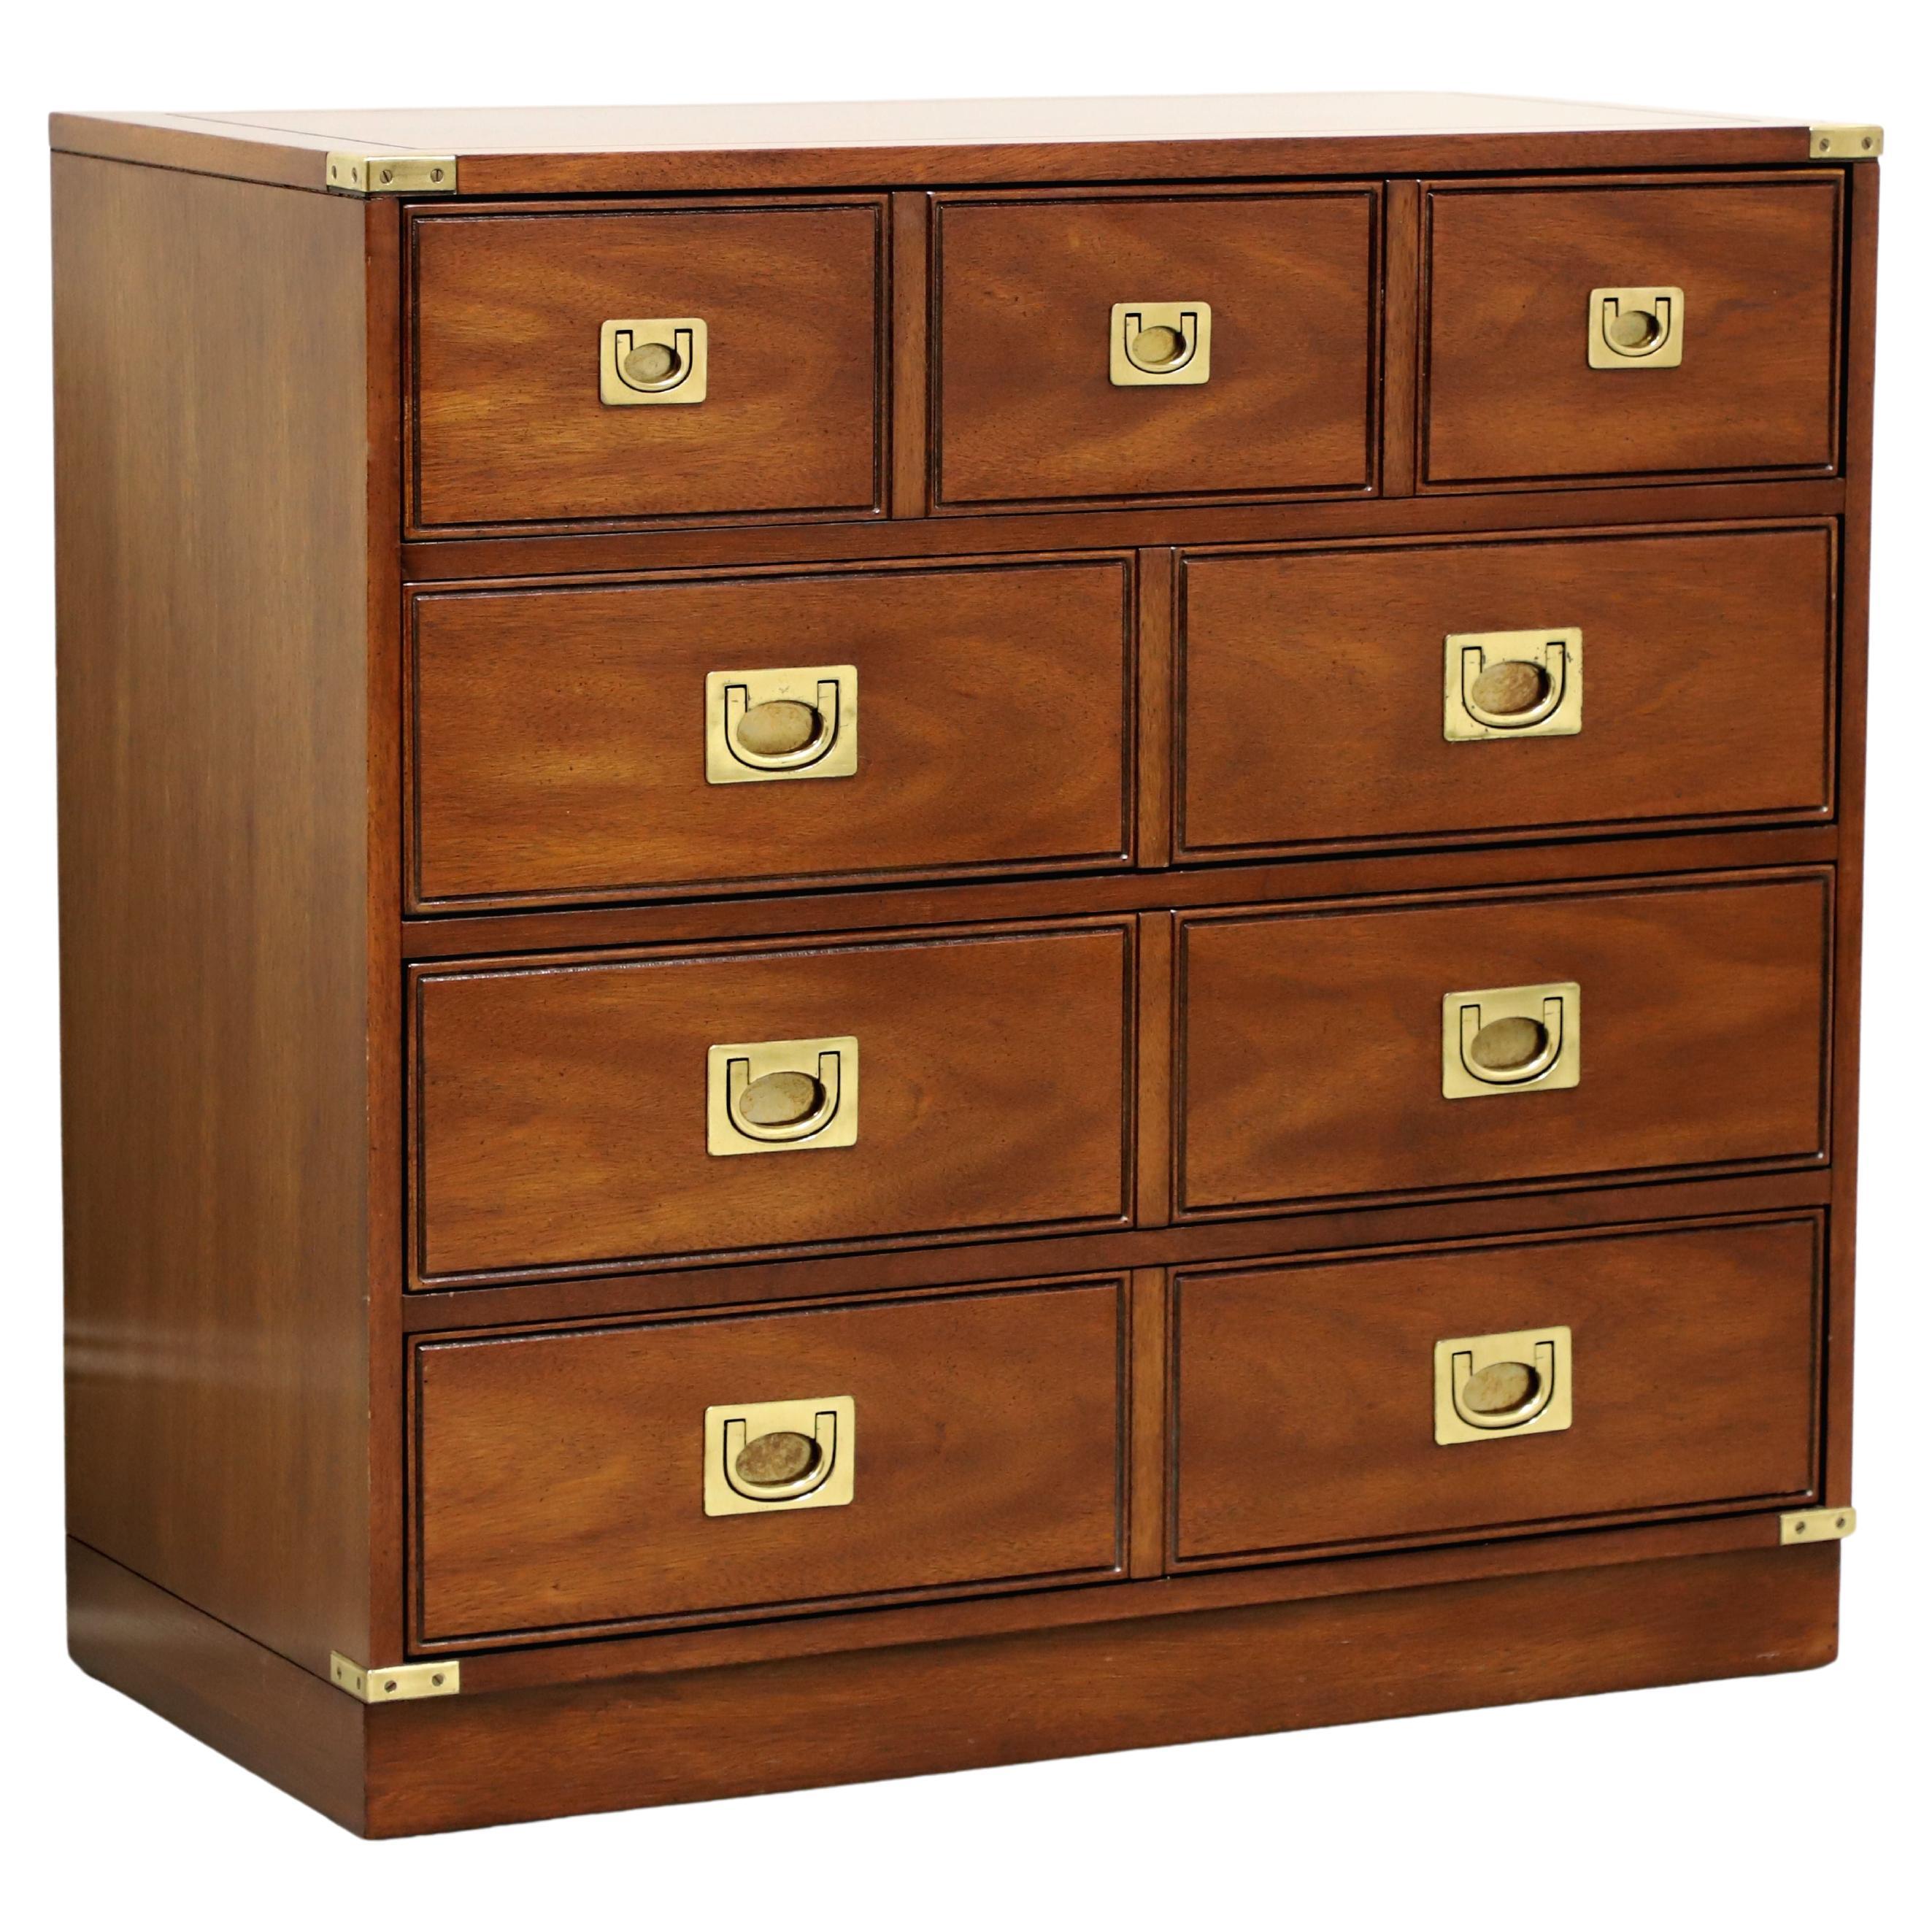 NATIONAL MT. AIRY Mahogany Campaign Style Bachelor Chest